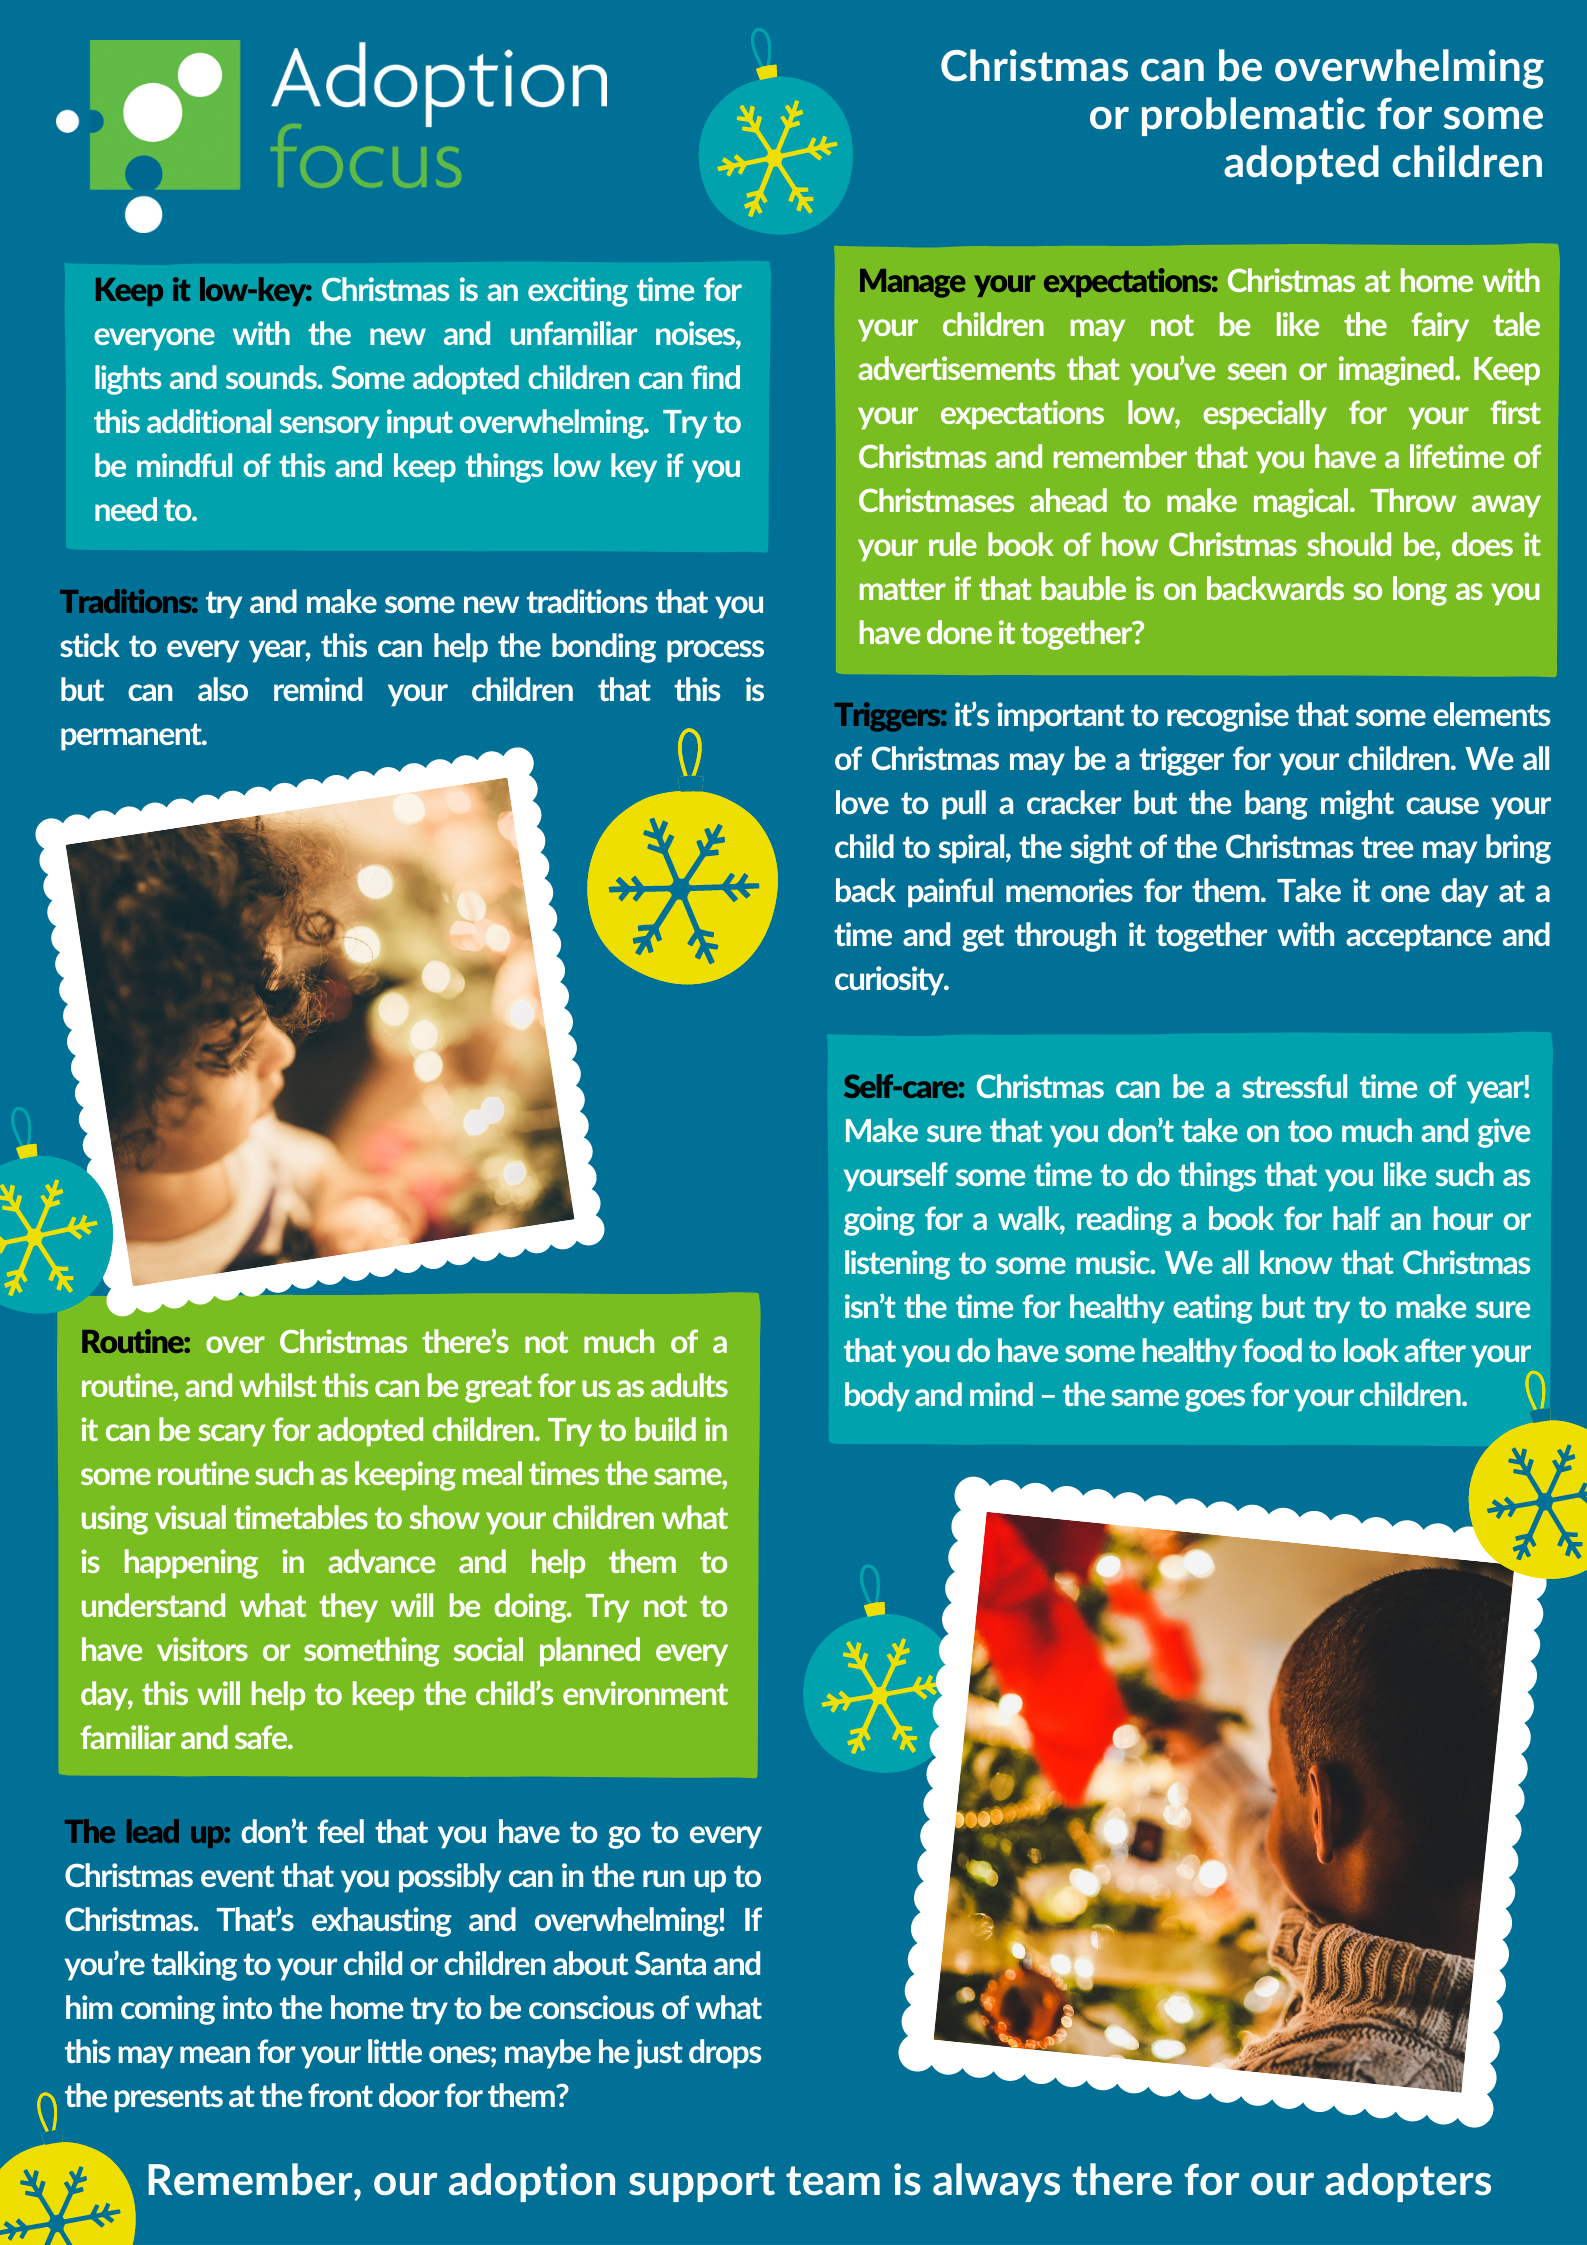 A fact sheet with Christmas tips for adopters